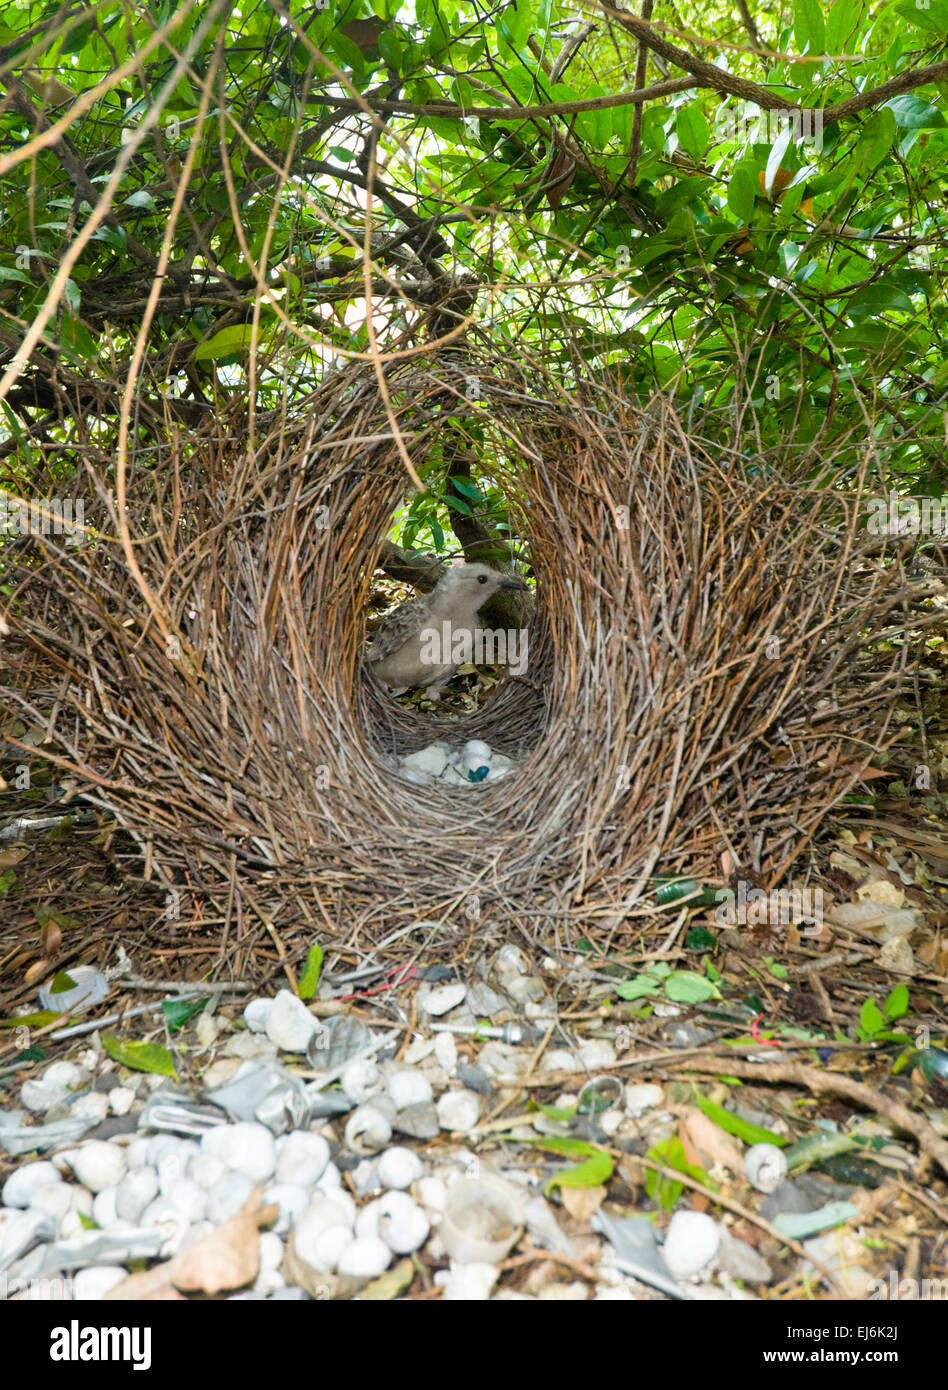 Great Bowerbird (Chlamydera nuchalis) in his bower decorated with white ornaments, Kakadu National Park, Northern Territory, NT, Australia Stock Photo